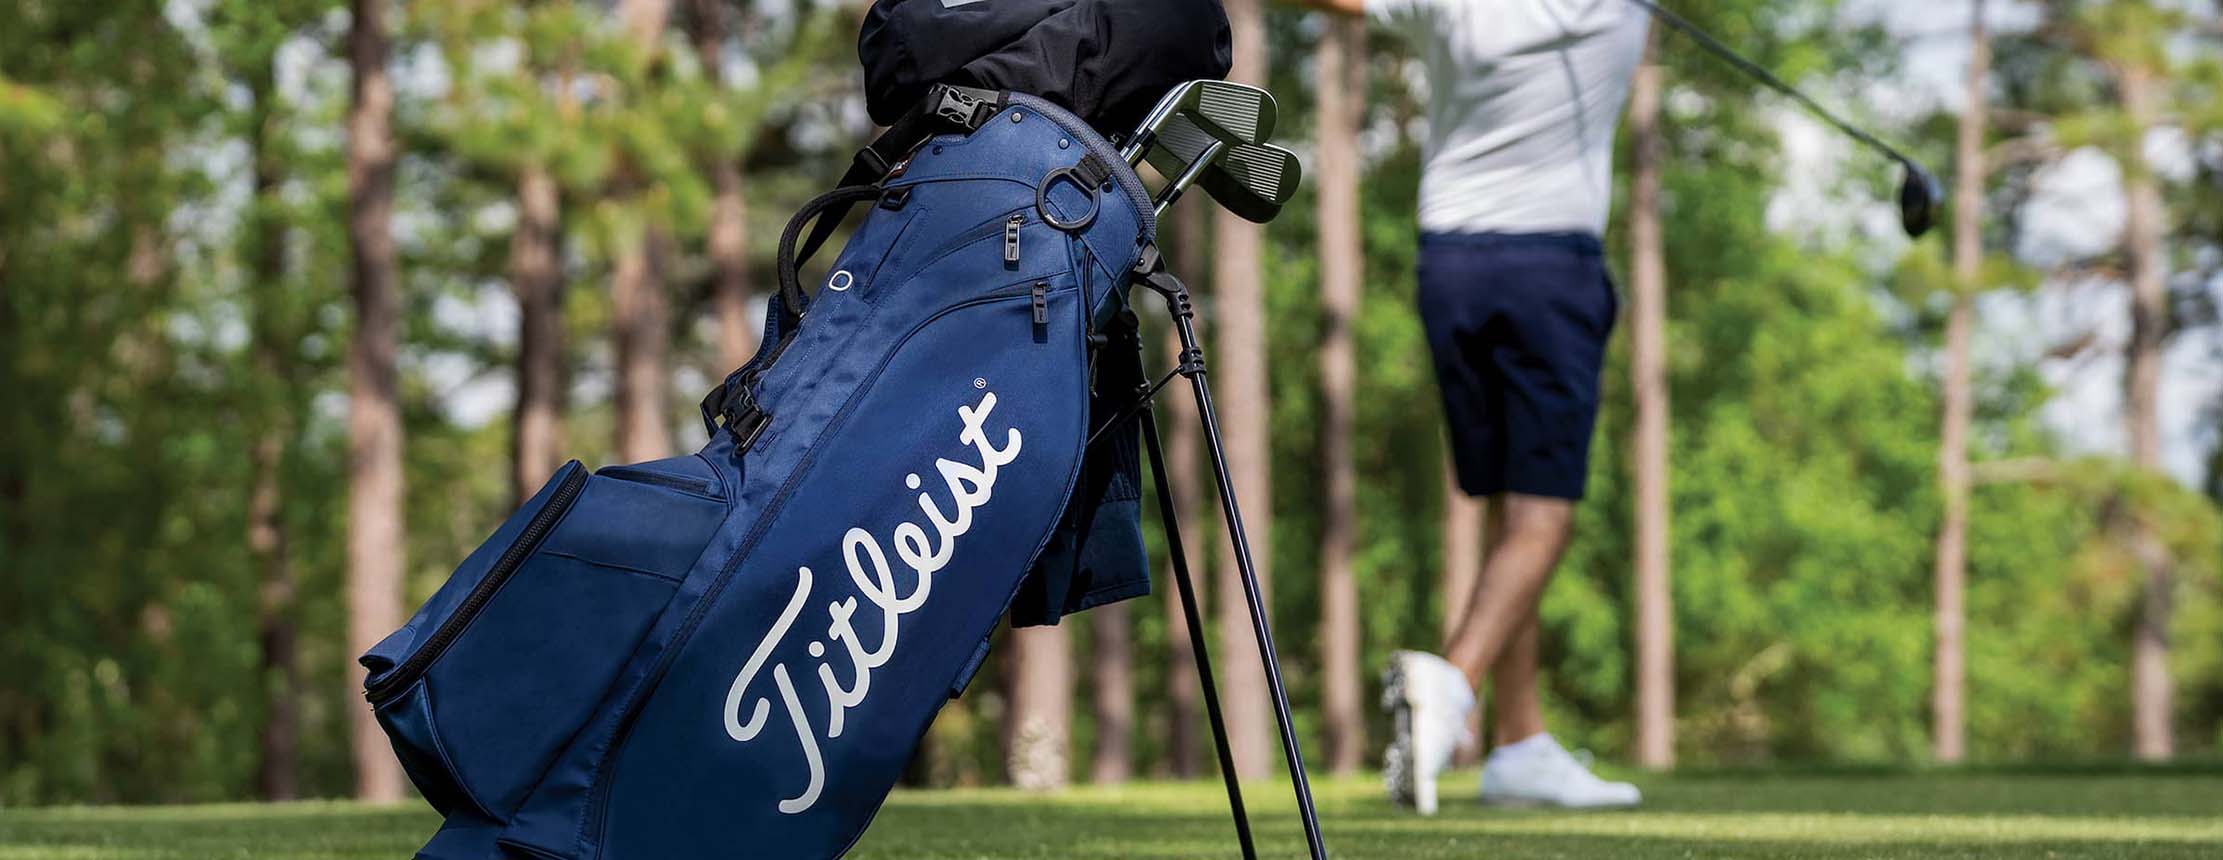 Titleist golf stand bag in front of golfer